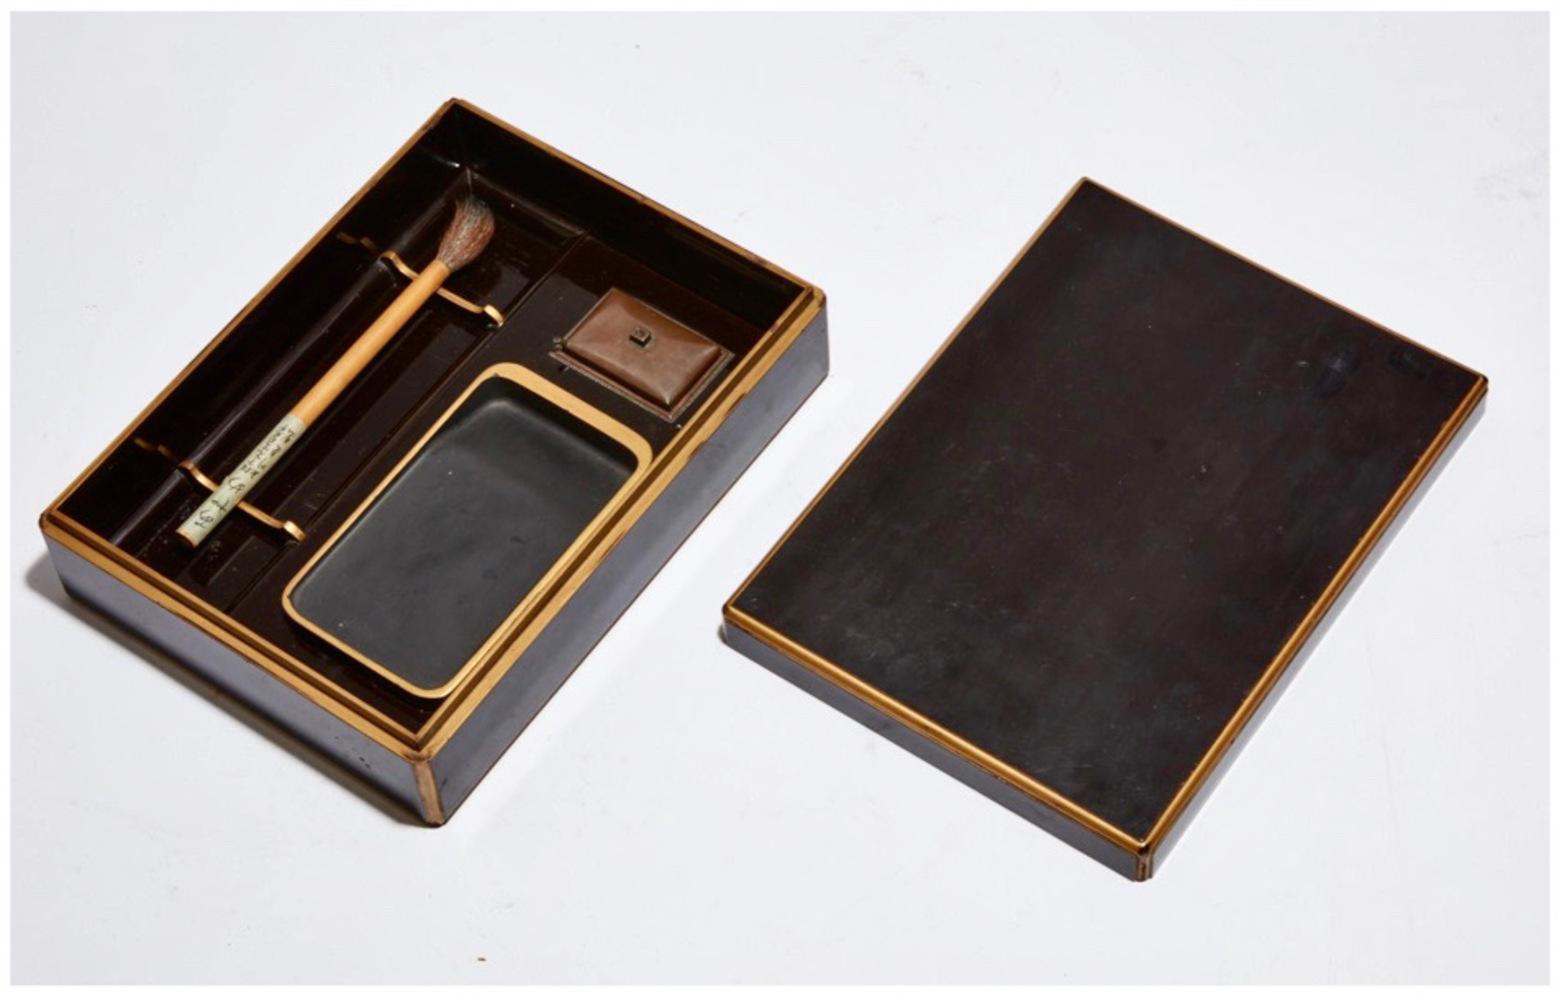 This is a very elegant and simplistic Japanese lacquered calligraphy box that dates to the mid-20th century. The minimal refined designed box includes the brush and other required writing tools. The lacquer (which we have polished) is in good